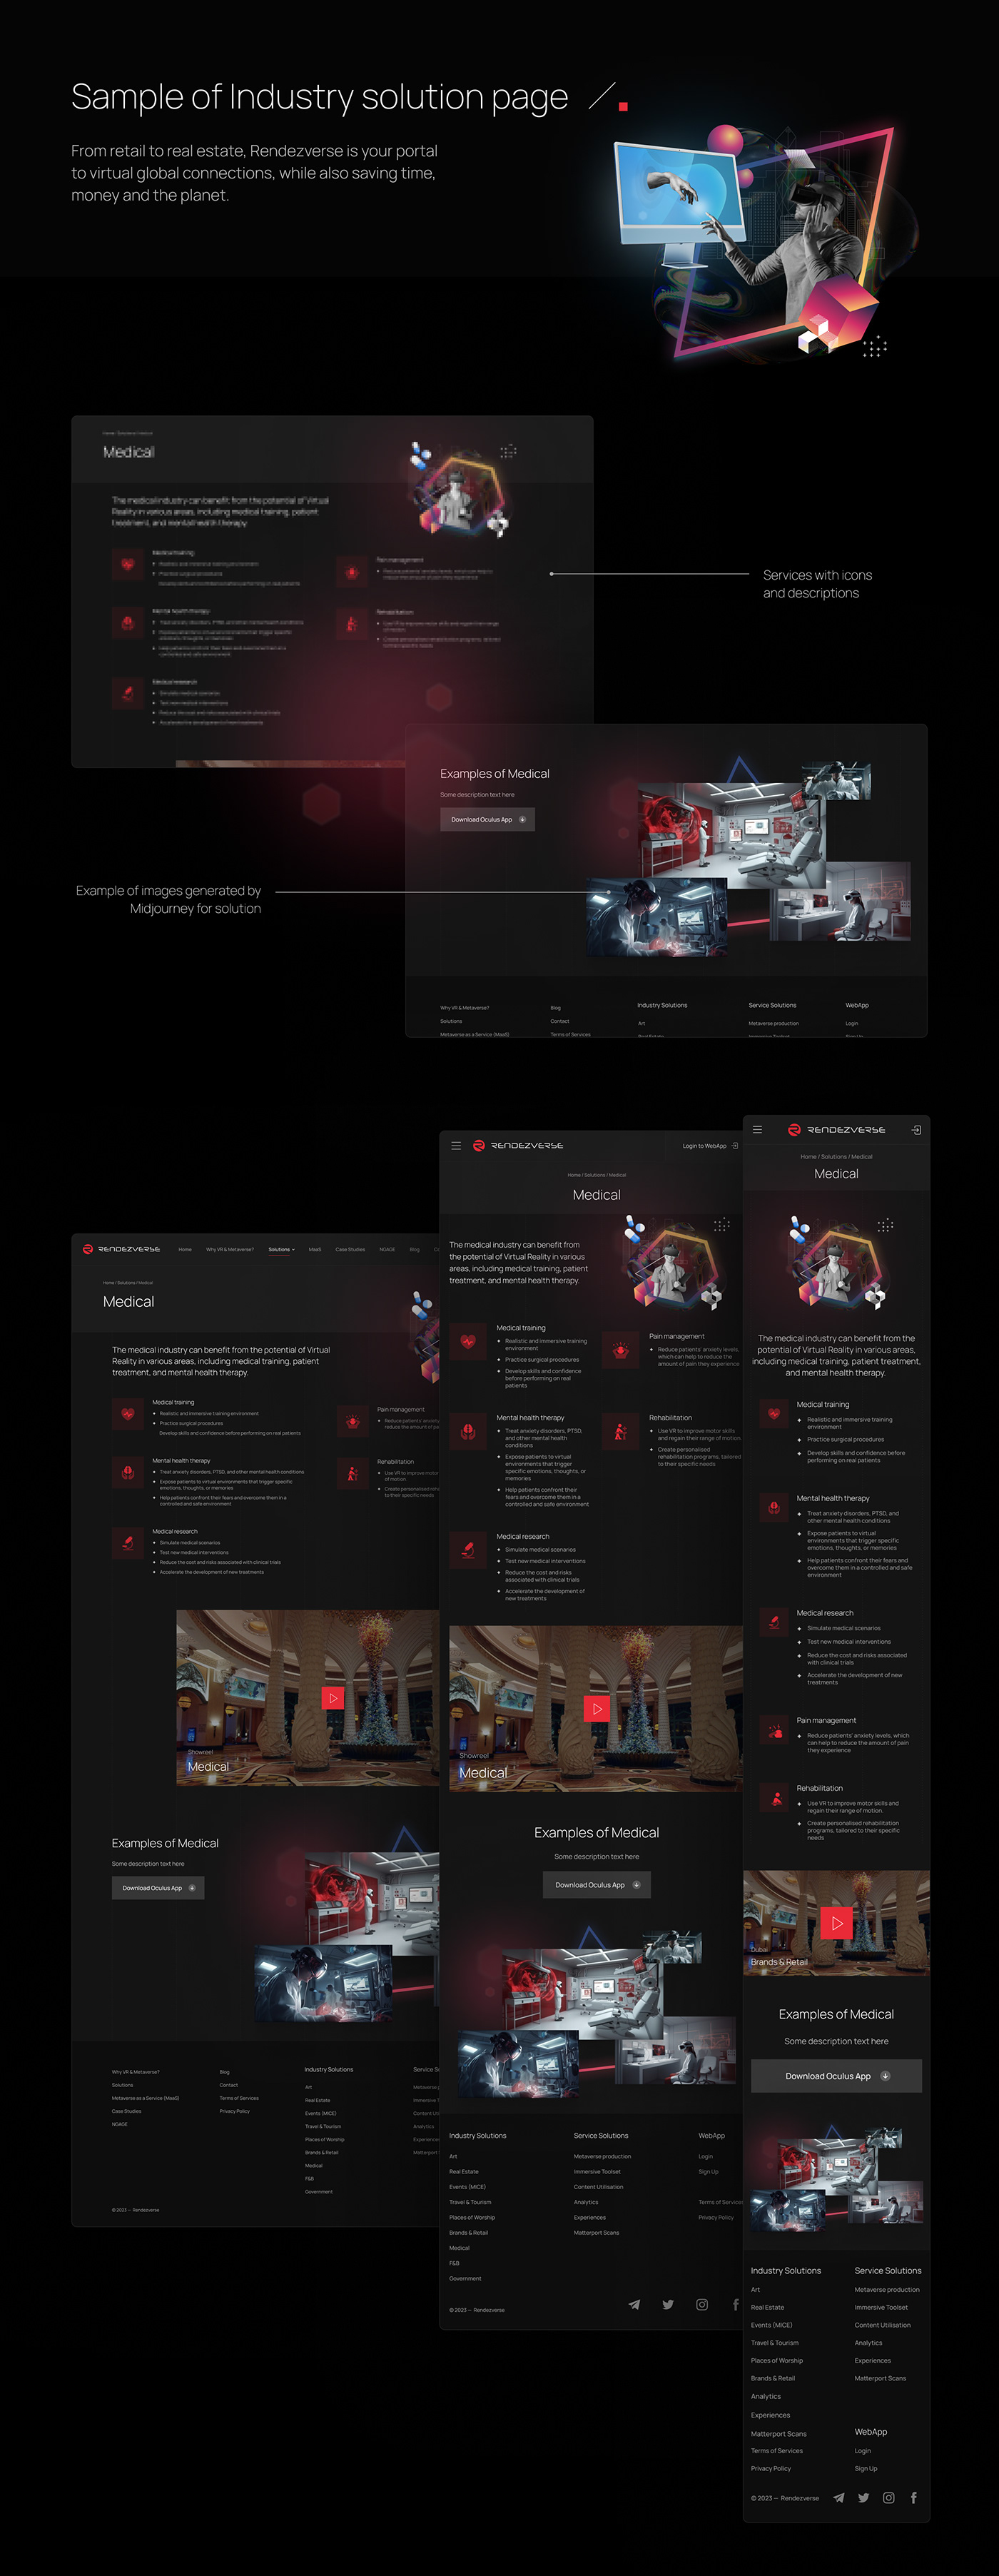 vr Virtual reality site UI/UX landing page Website Design user interface user experience Interface